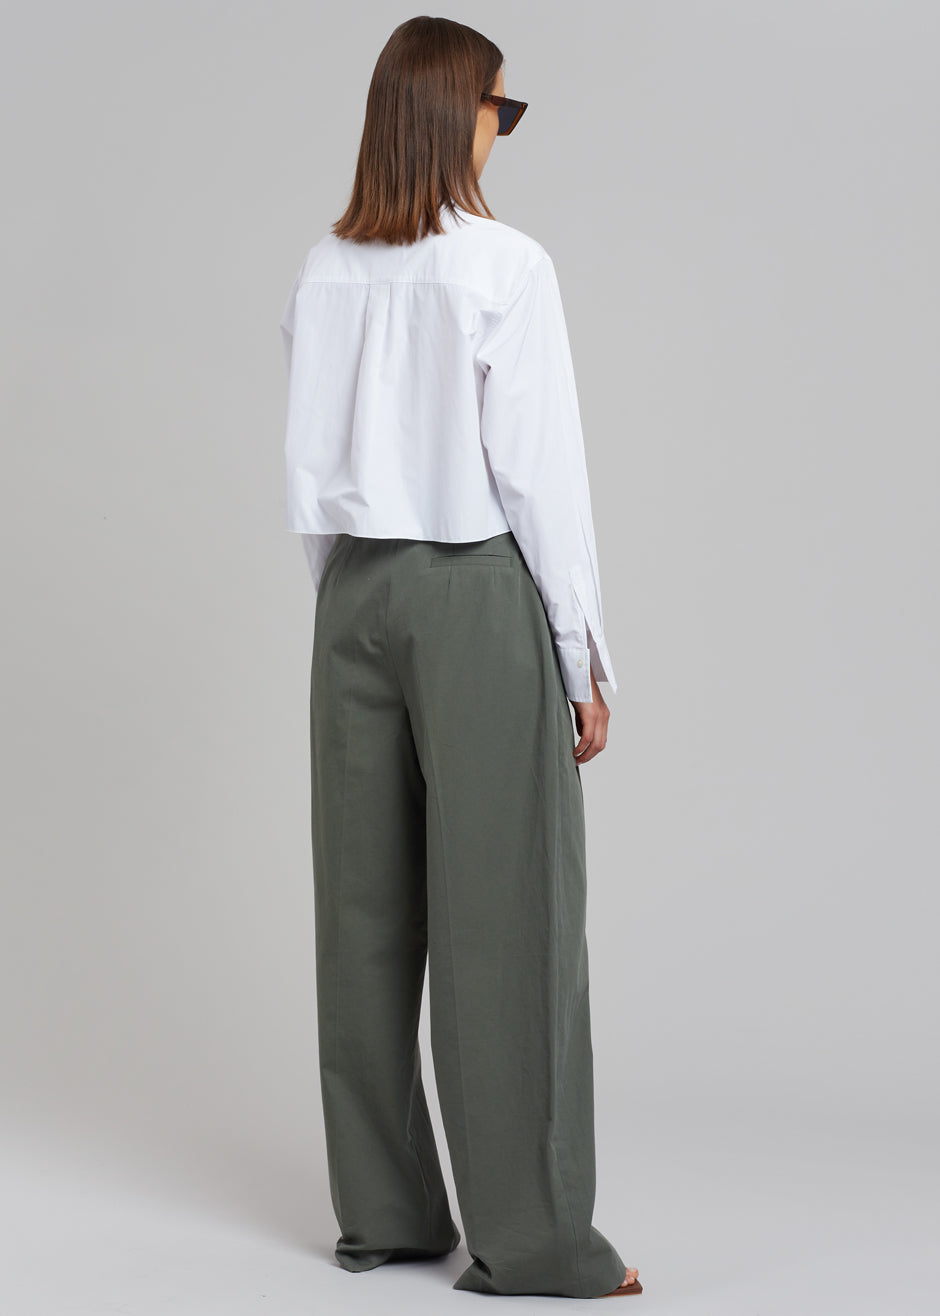 Tansy Cotton Pants - Olive - 5